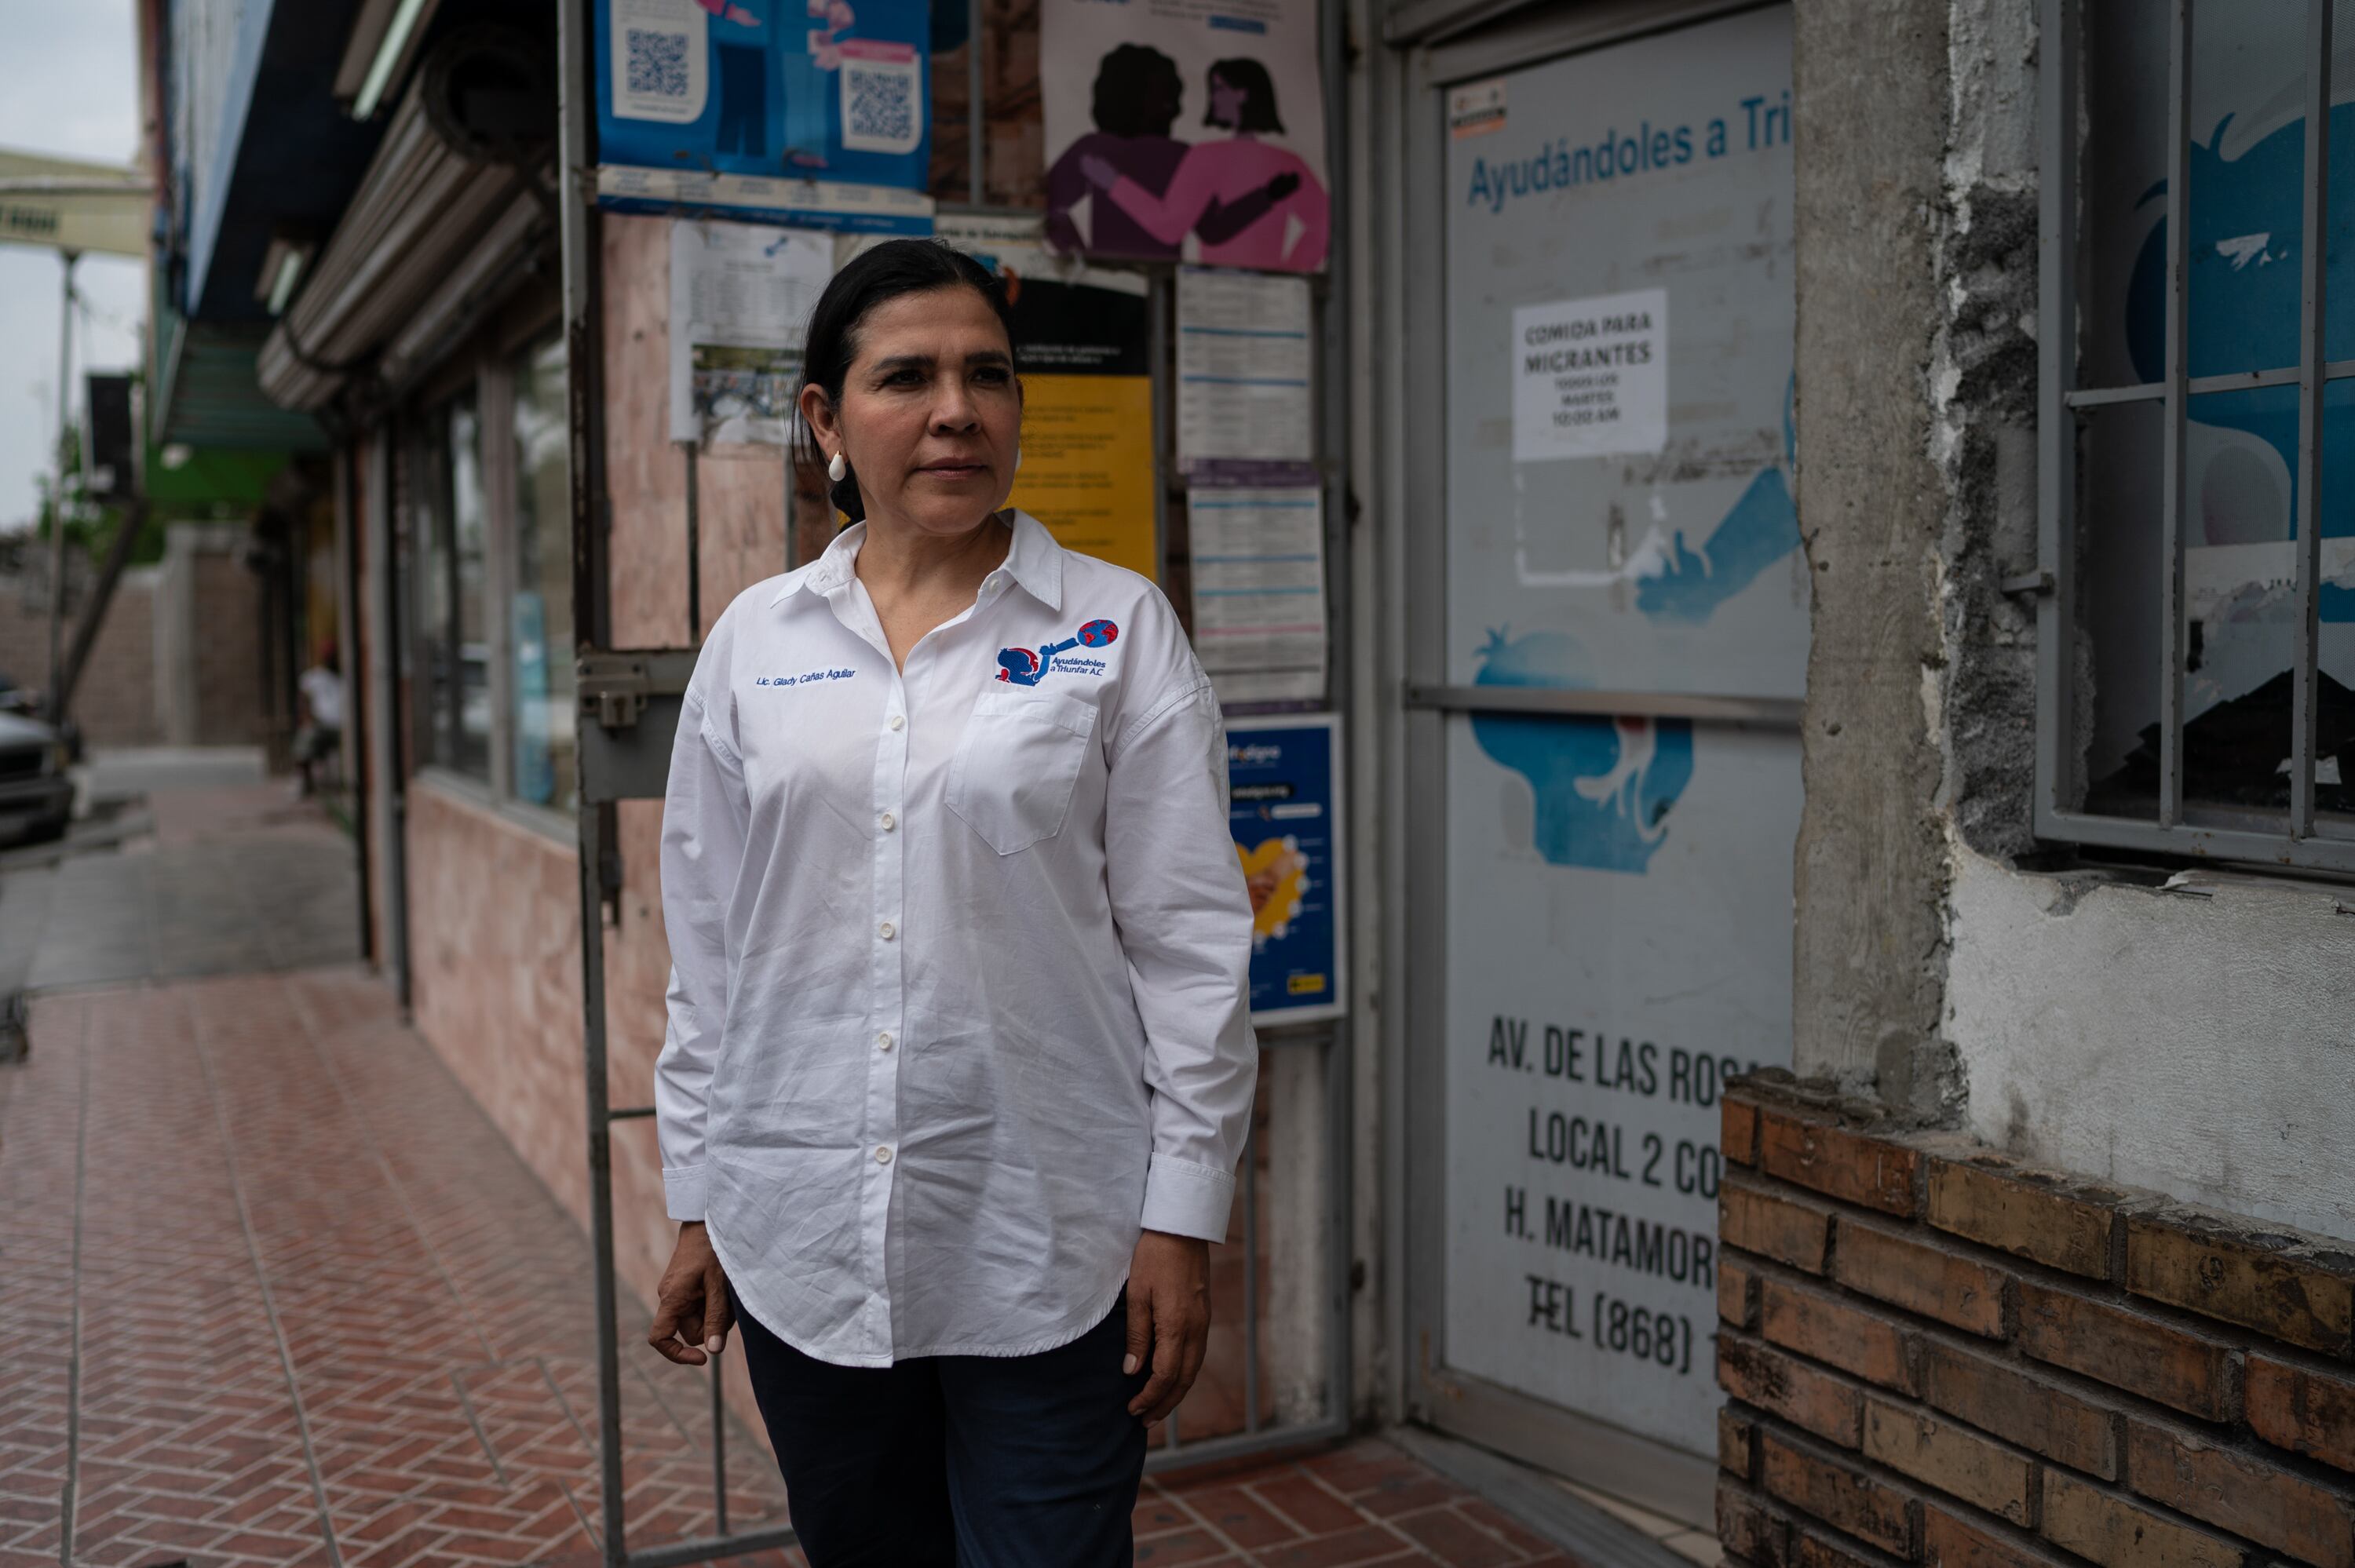 Glady Cañas, president of Ayudándoles a Triunfar, stands outside the organization's offices in Matamoros, Mexico.